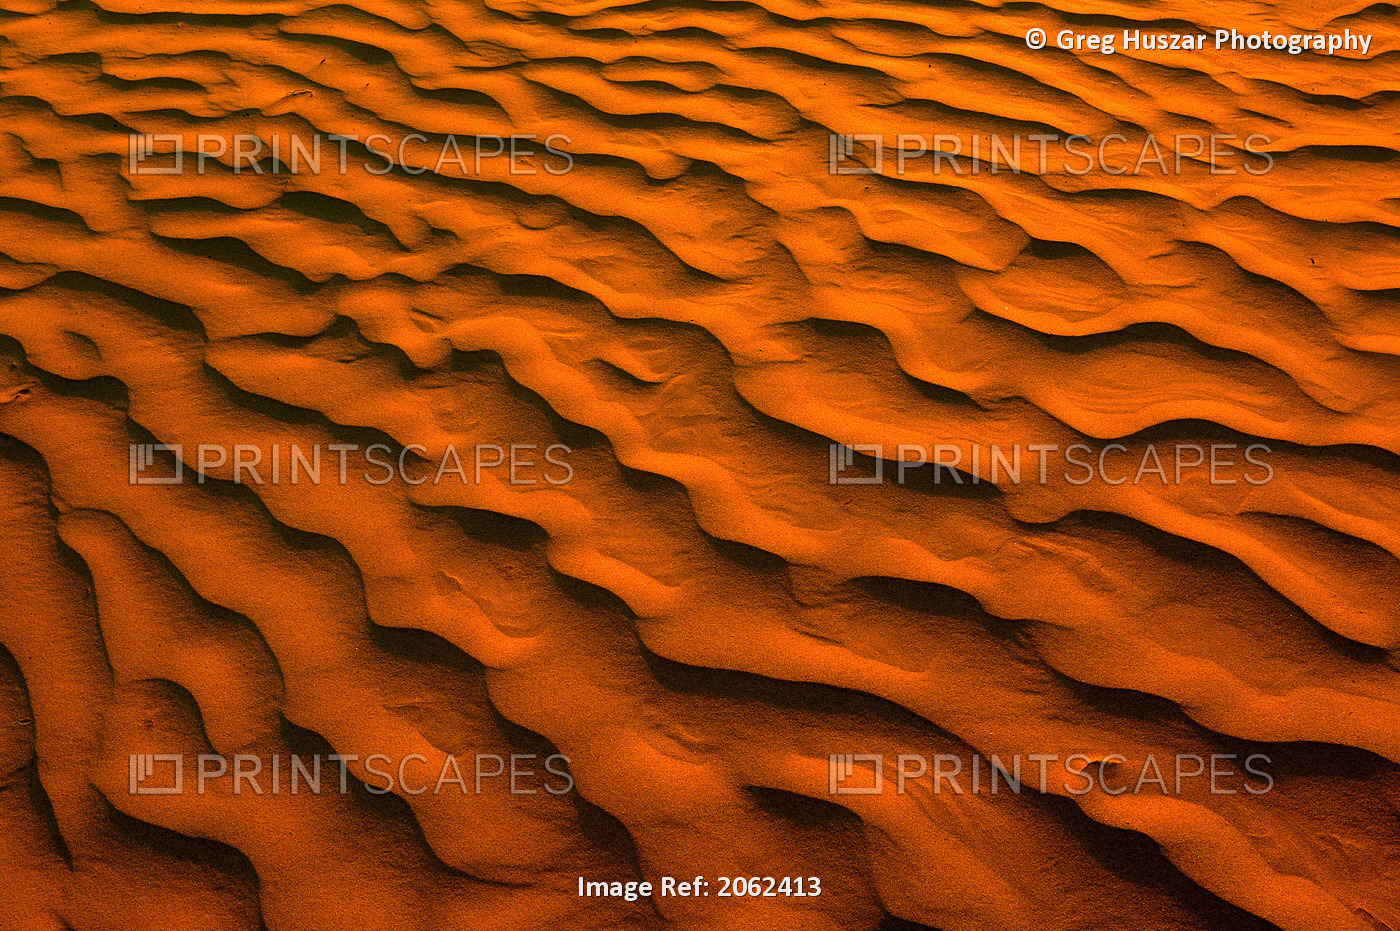 Desert-Like Conditions In The Fragile Ecosystem Of The Great Sand Hills Of ...